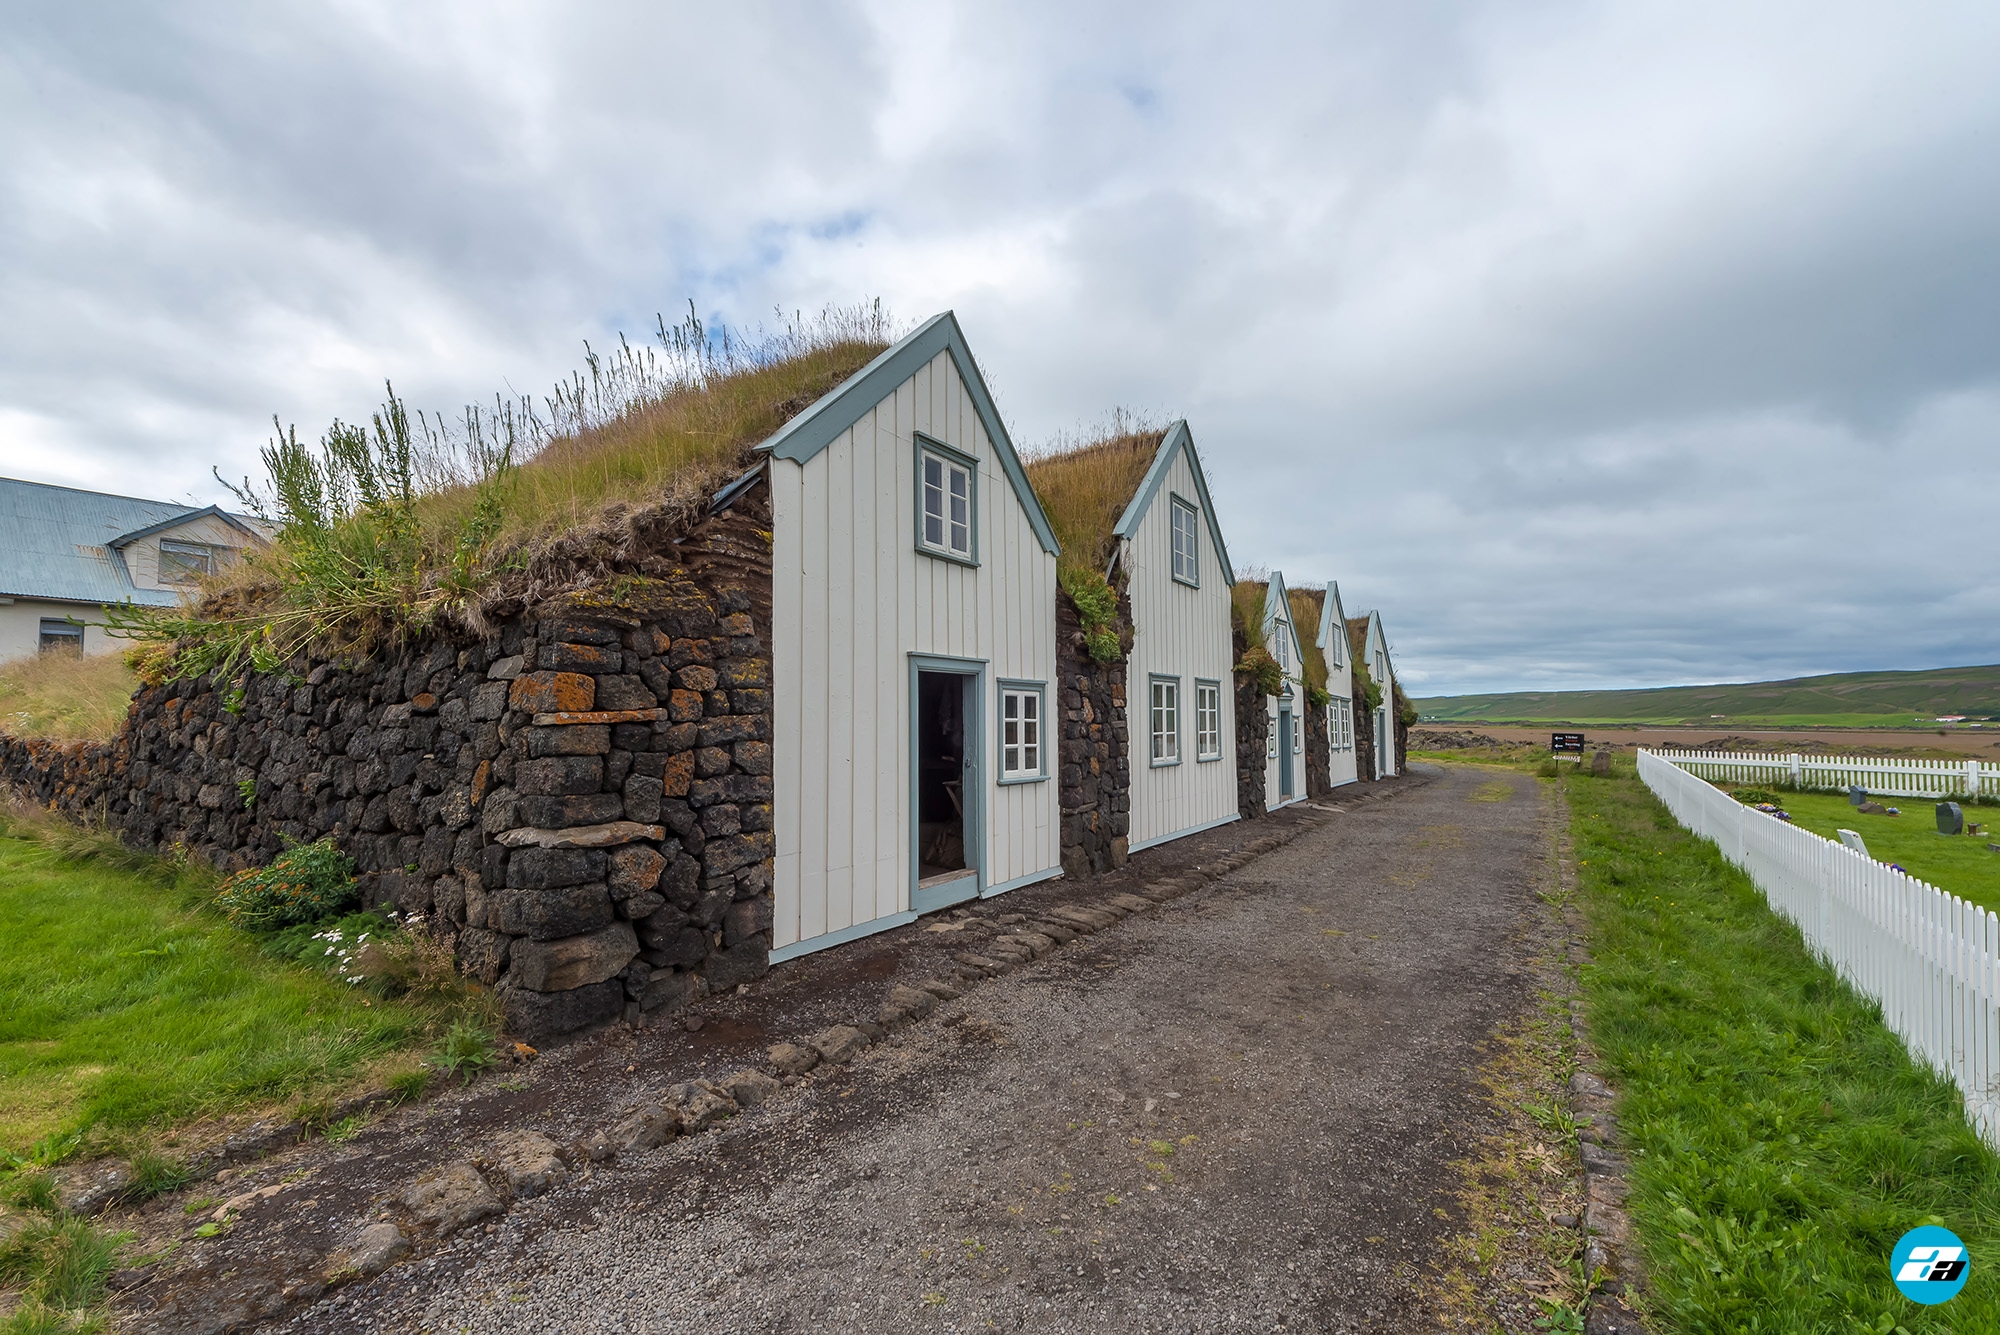 Iceland Travel, Ring Road, Turf Houses